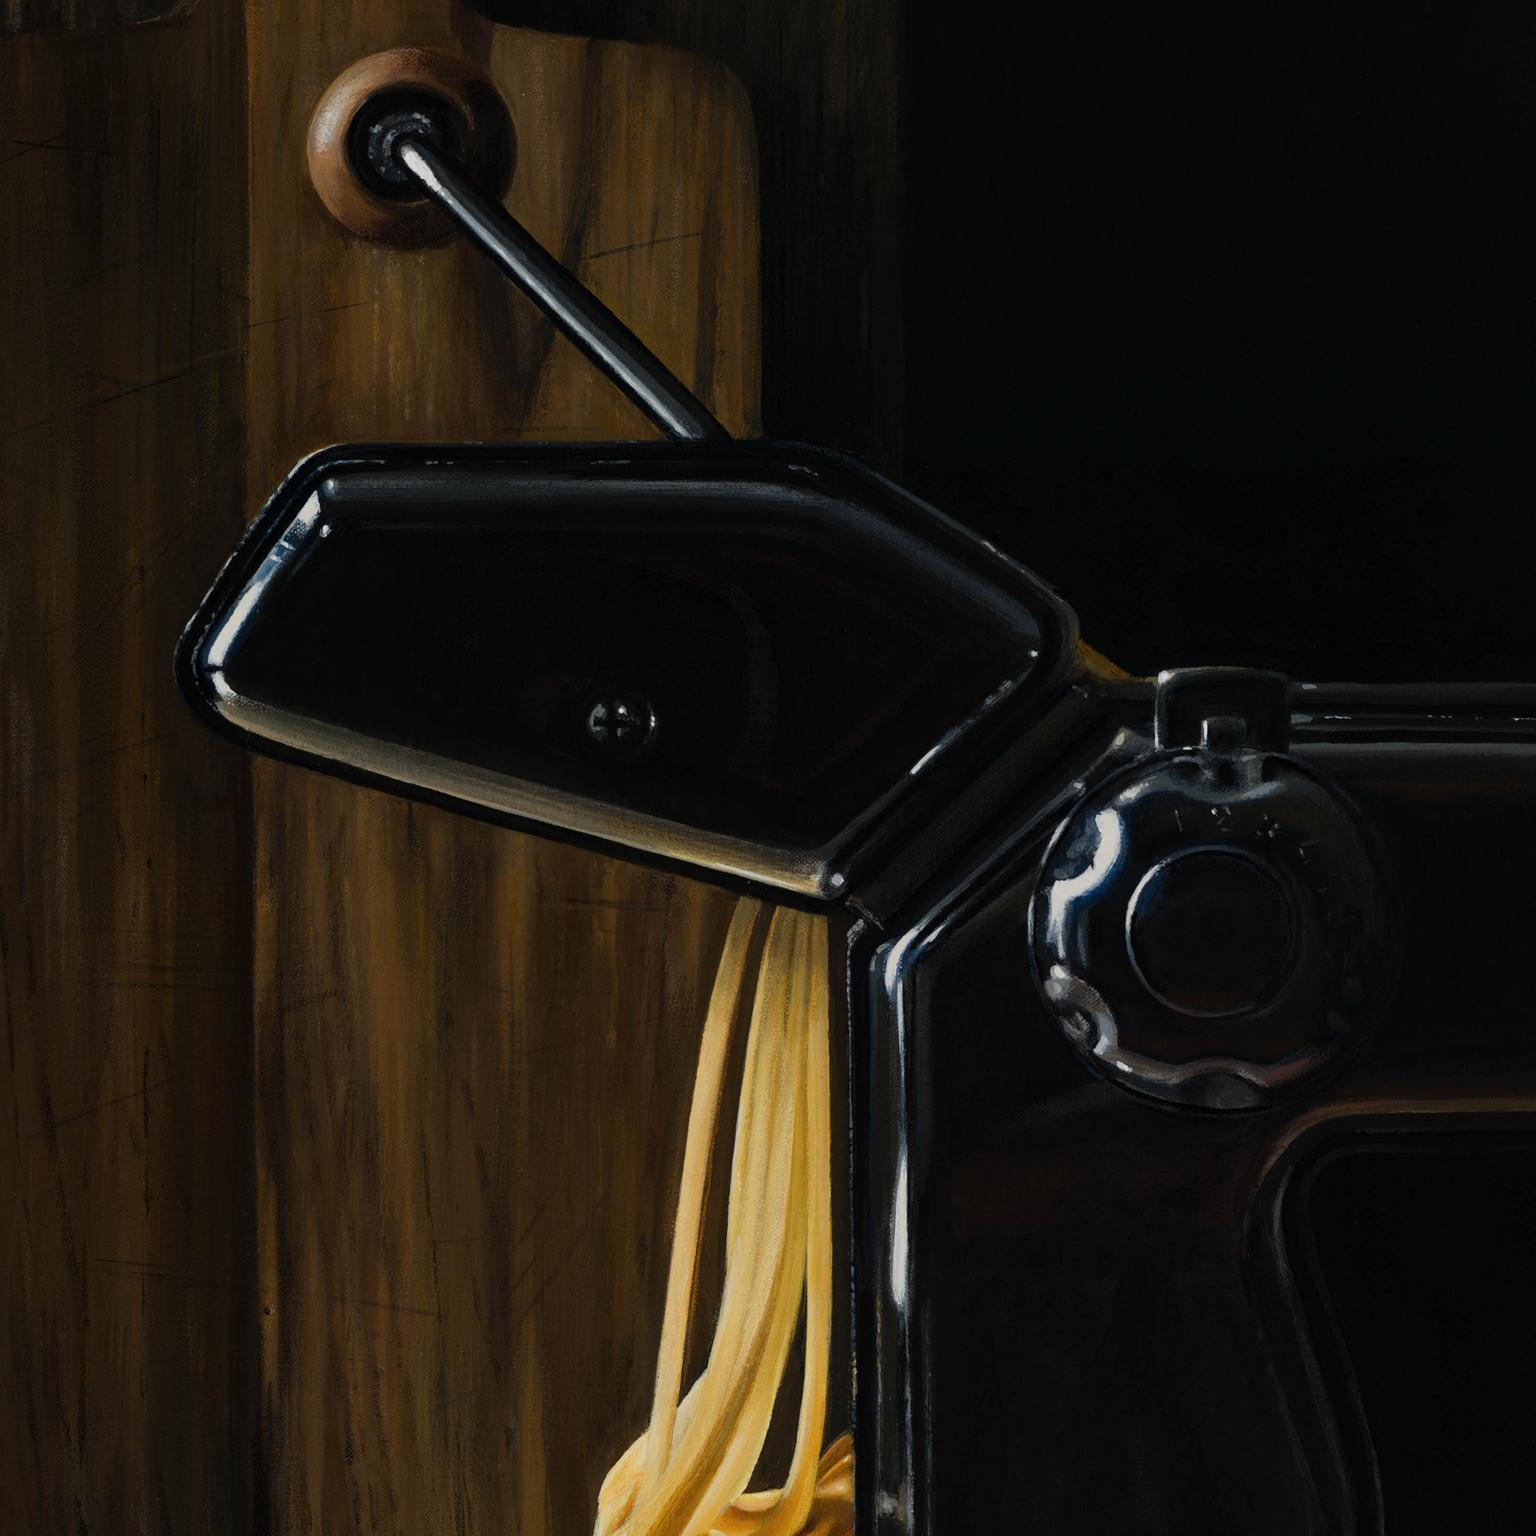 Contemporary Hyper Realist Acrylic Painting : Pasta Machine Heidi von Faber

Those who enjoy soothing and powerful still lifes will certainly appreciate Heidi von Faber’s work. The artist from The Hague paints still lifes in which the influence of